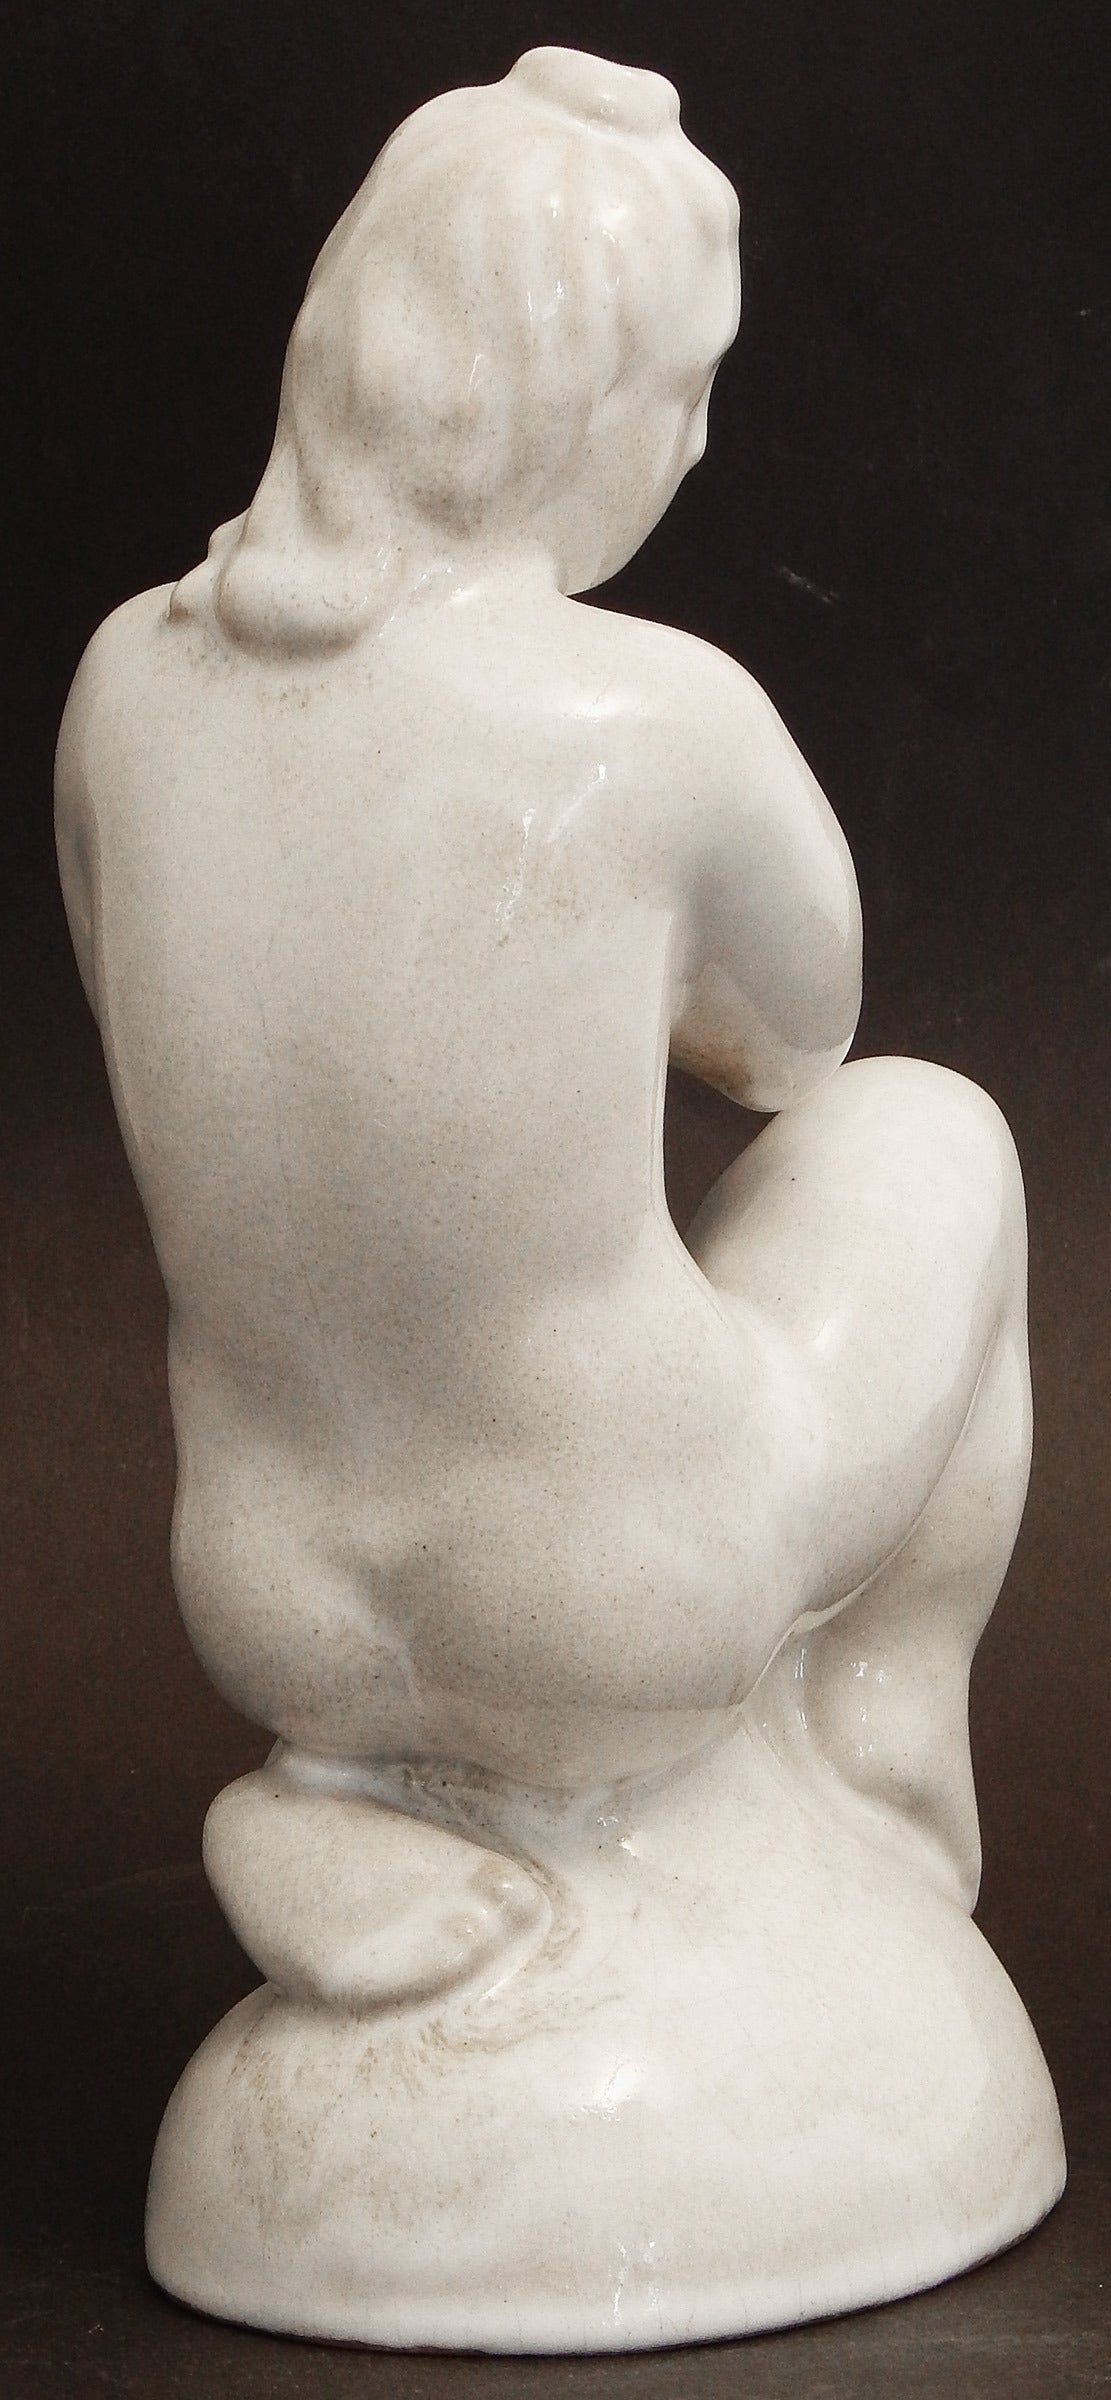 Finished in a soft ivory glaze with subtle shifts to dove grey, this lovely, placid nude is depicted in a seated position with her hands clasped and her gaze looking into the distance, the subject deep in thought. Unsigned, though marked with a 